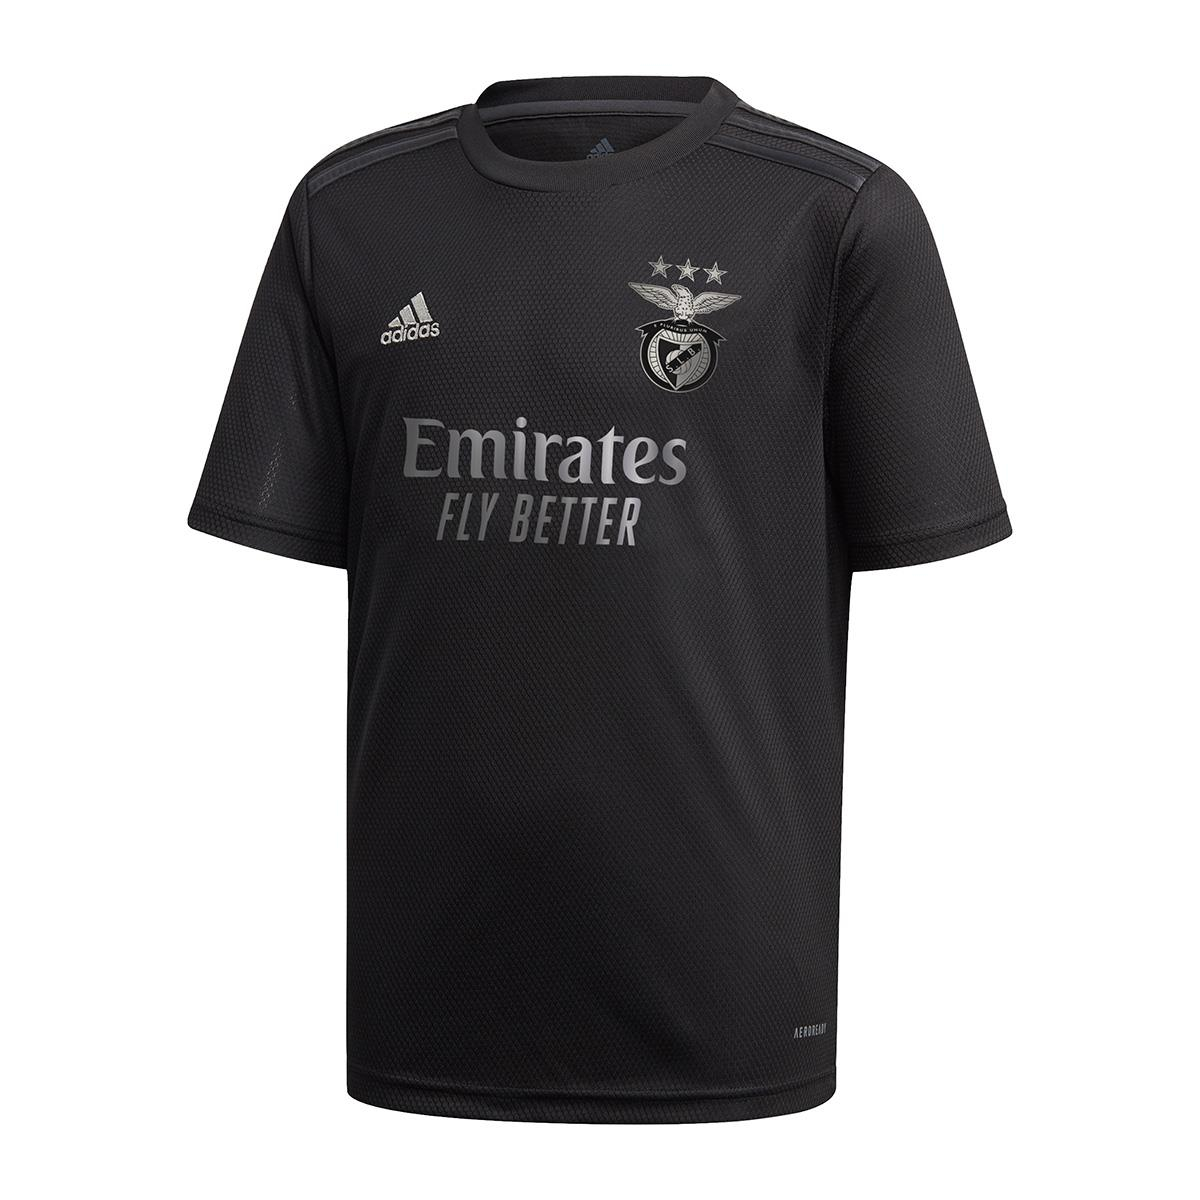 benfica maillot